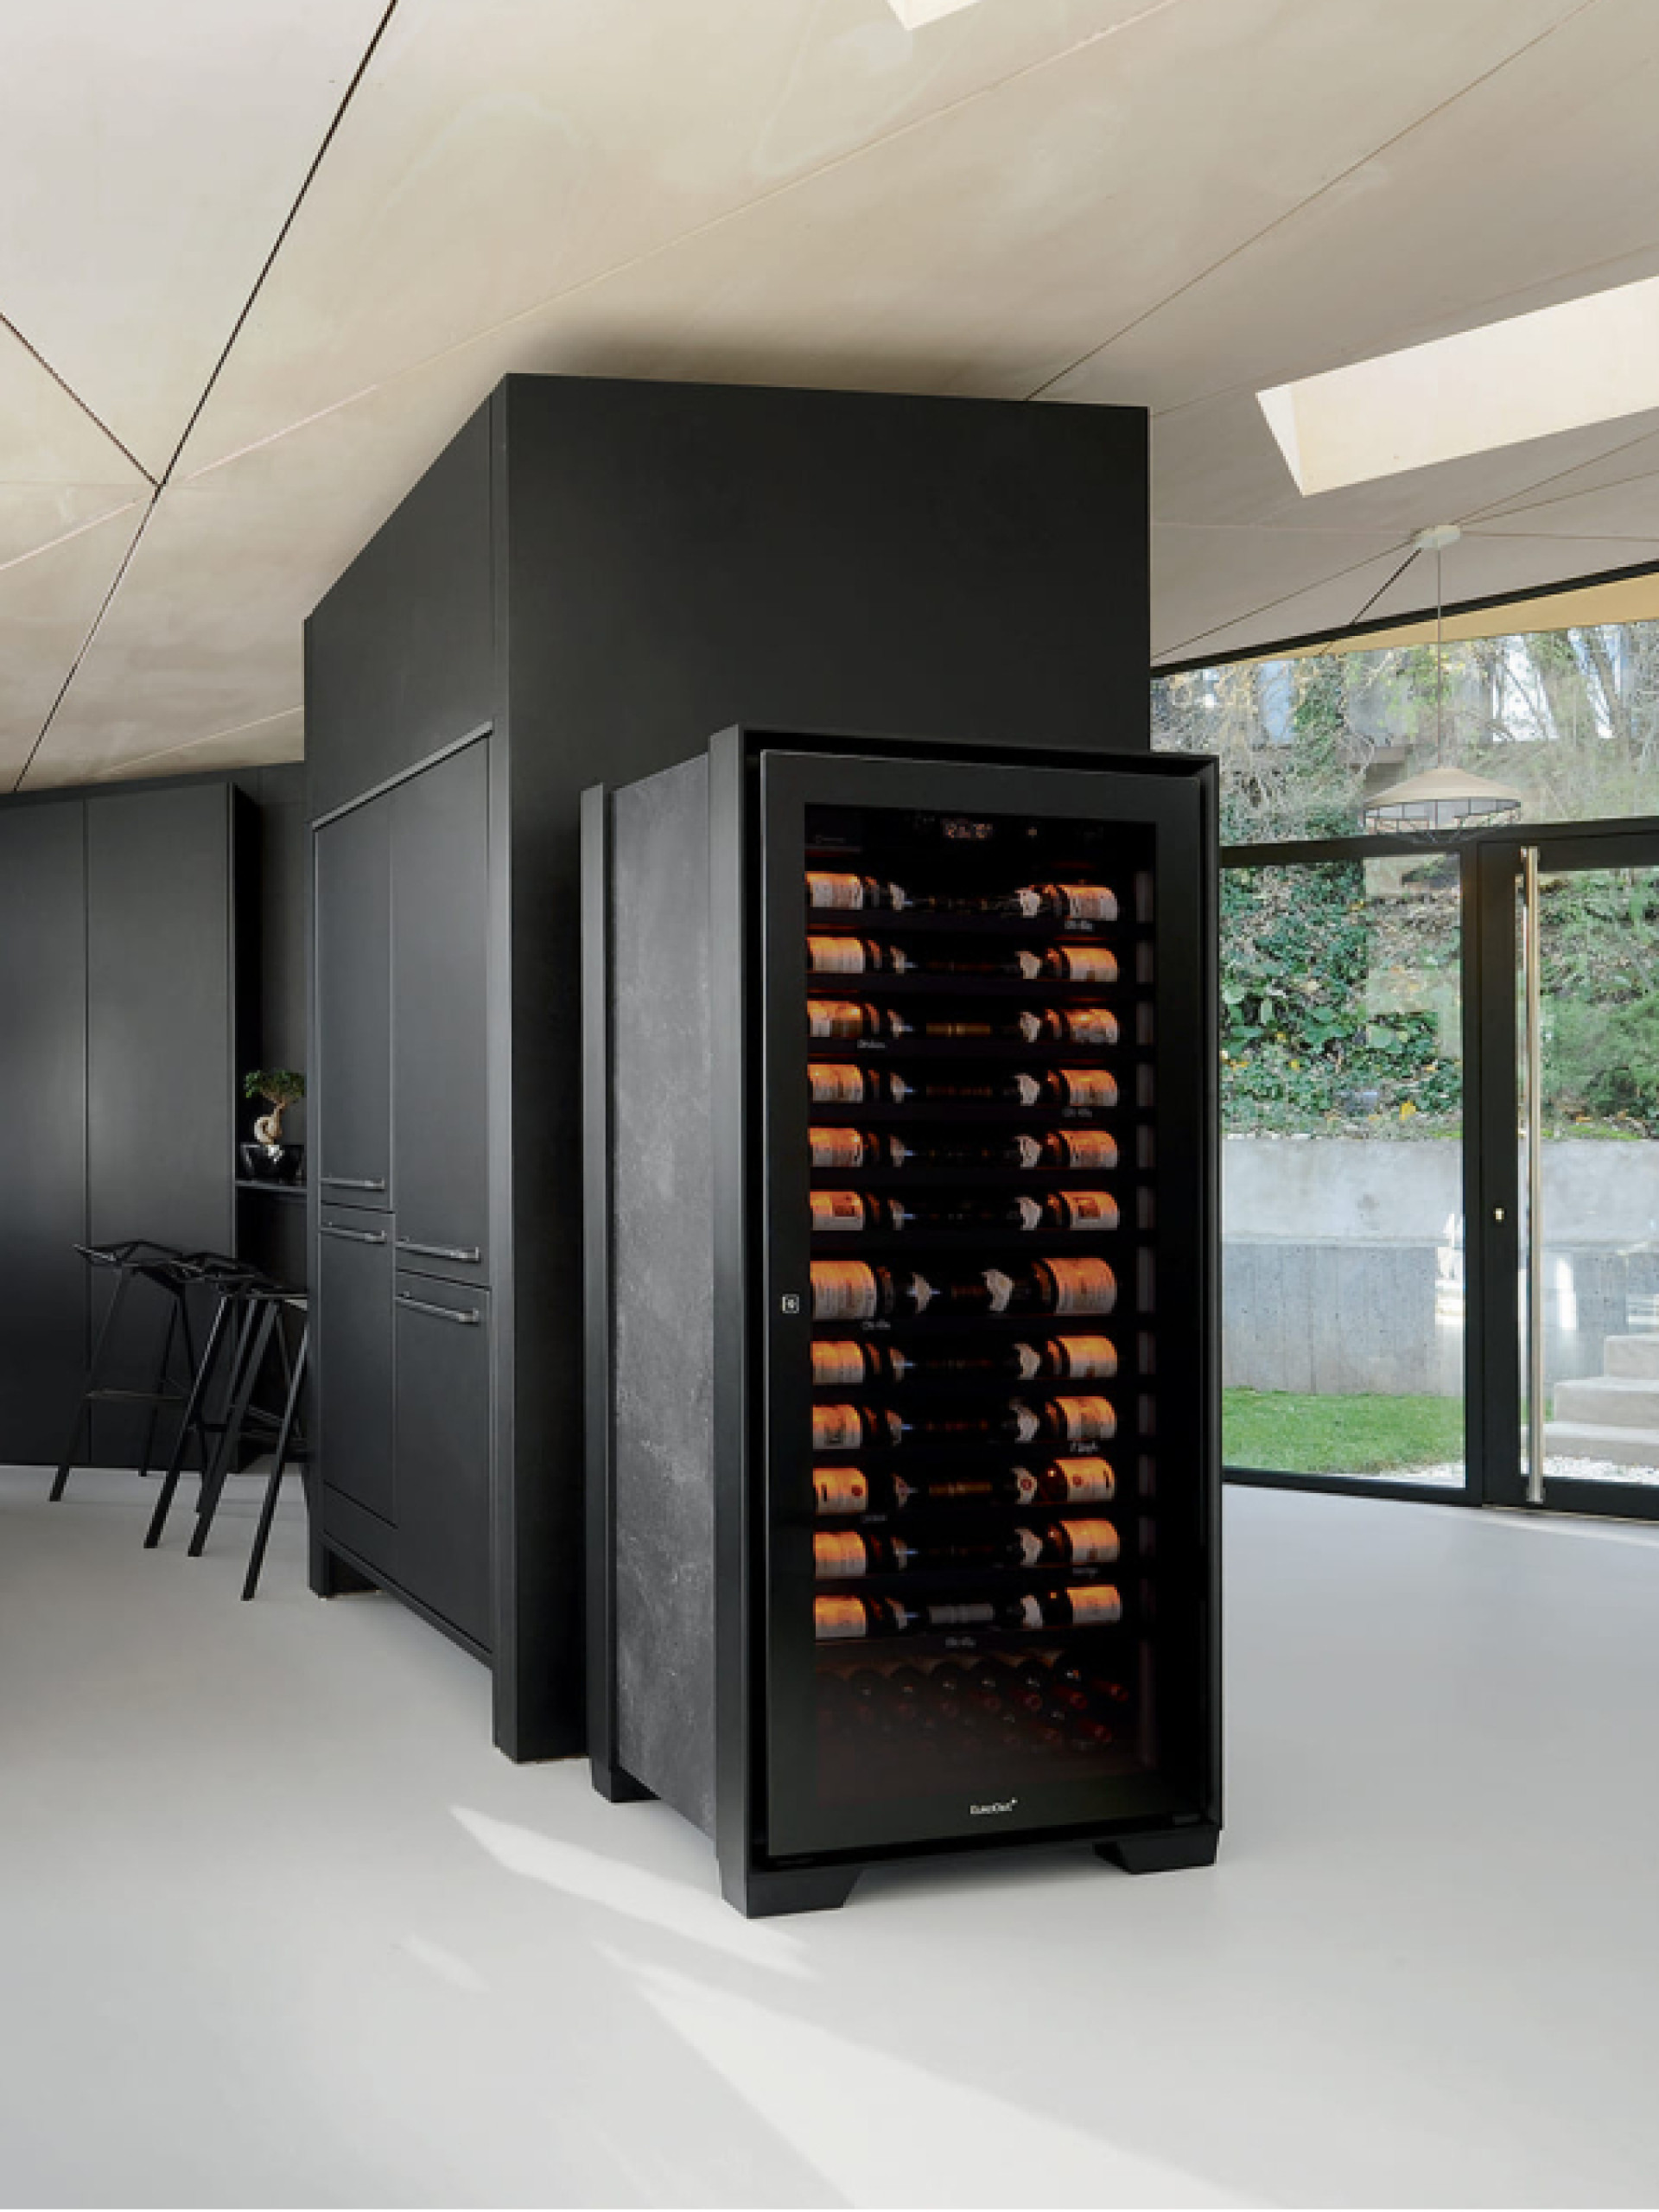 The Royal service wine cooler installed in an open kitchen - highlights your exceptional bottles.